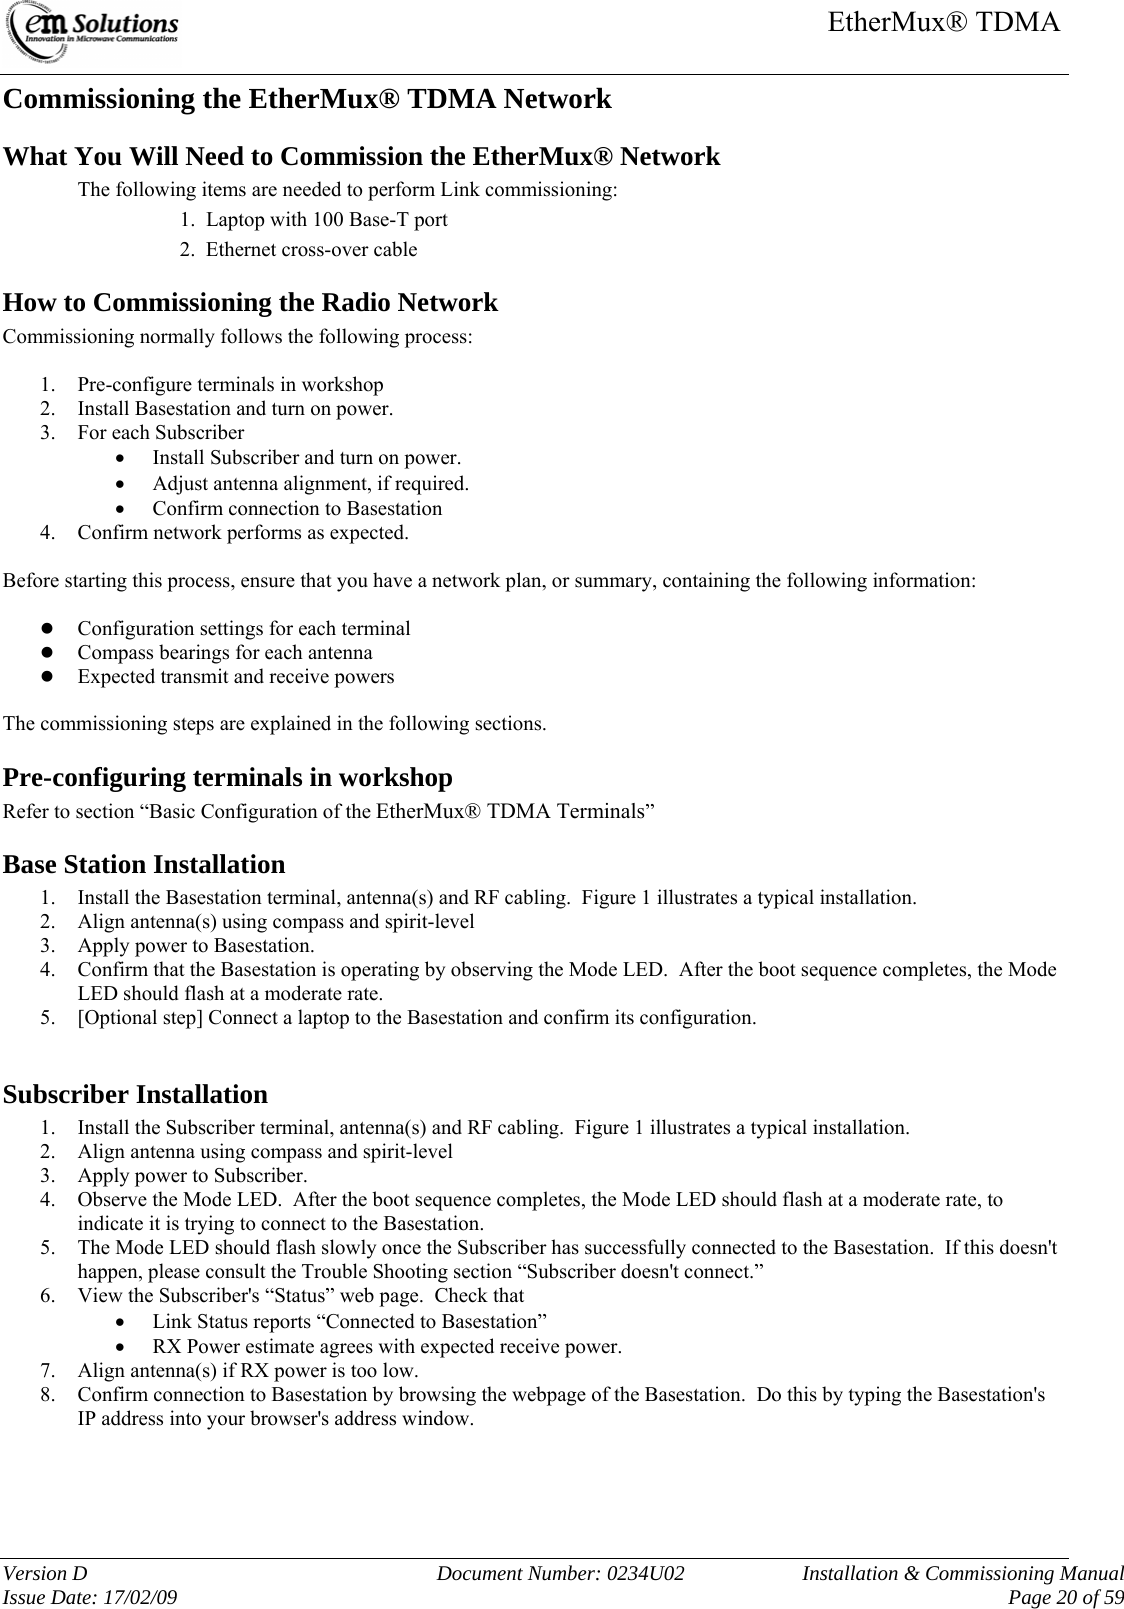     EtherMux® TDMA   Version D  Document Number: 0234U02   Installation &amp; Commissioning Manual Issue Date: 17/02/09     Page 20 of 59 Commissioning the EtherMux® TDMA Network What You Will Need to Commission the EtherMux® Network   The following items are needed to perform Link commissioning: 1.  Laptop with 100 Base-T port 2.  Ethernet cross-over cable How to Commissioning the Radio Network  Commissioning normally follows the following process:  1. Pre-configure terminals in workshop 2. Install Basestation and turn on power. 3. For each Subscriber • Install Subscriber and turn on power. • Adjust antenna alignment, if required. • Confirm connection to Basestation 4. Confirm network performs as expected.  Before starting this process, ensure that you have a network plan, or summary, containing the following information:  z Configuration settings for each terminal z Compass bearings for each antenna z Expected transmit and receive powers  The commissioning steps are explained in the following sections. Pre-configuring terminals in workshop Refer to section “Basic Configuration of the EtherMux® TDMA Terminals”  Base Station Installation 1. Install the Basestation terminal, antenna(s) and RF cabling.  Figure 1 illustrates a typical installation. 2. Align antenna(s) using compass and spirit-level  3. Apply power to Basestation. 4. Confirm that the Basestation is operating by observing the Mode LED.  After the boot sequence completes, the Mode LED should flash at a moderate rate. 5. [Optional step] Connect a laptop to the Basestation and confirm its configuration.  Subscriber Installation 1. Install the Subscriber terminal, antenna(s) and RF cabling.  Figure 1 illustrates a typical installation. 2. Align antenna using compass and spirit-level  3. Apply power to Subscriber. 4. Observe the Mode LED.  After the boot sequence completes, the Mode LED should flash at a moderate rate, to indicate it is trying to connect to the Basestation. 5. The Mode LED should flash slowly once the Subscriber has successfully connected to the Basestation.  If this doesn&apos;t happen, please consult the Trouble Shooting section “Subscriber doesn&apos;t connect.” 6. View the Subscriber&apos;s “Status” web page.  Check that • Link Status reports “Connected to Basestation”  • RX Power estimate agrees with expected receive power. 7. Align antenna(s) if RX power is too low. 8. Confirm connection to Basestation by browsing the webpage of the Basestation.  Do this by typing the Basestation&apos;s IP address into your browser&apos;s address window.    